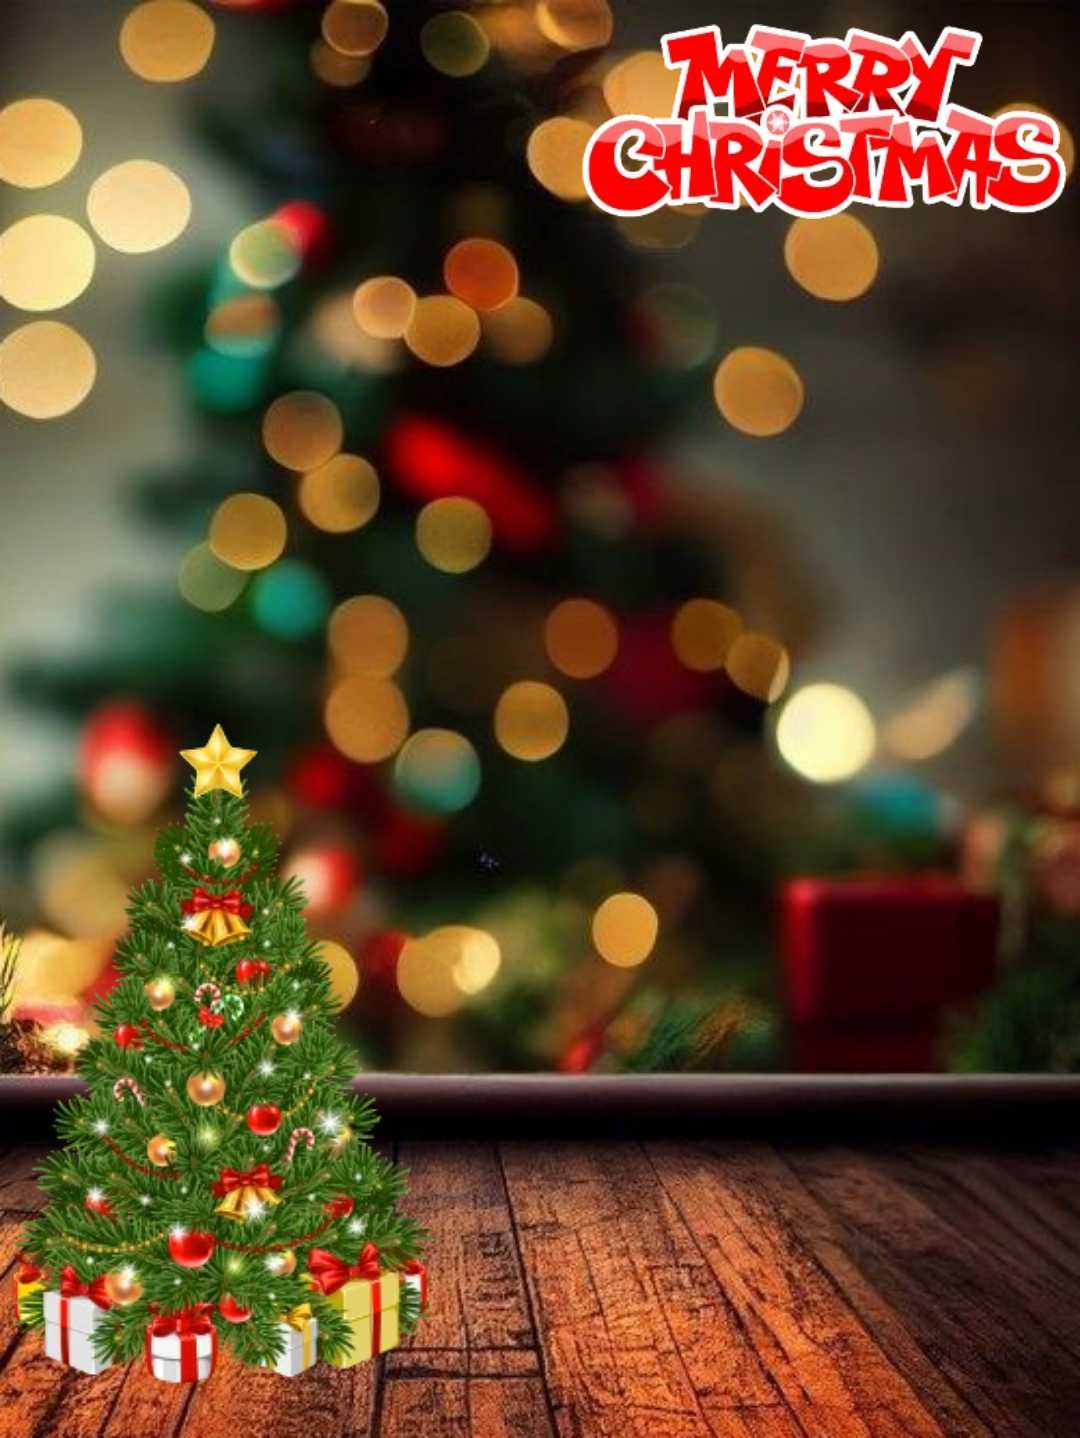 Marry Christmas winter background hd